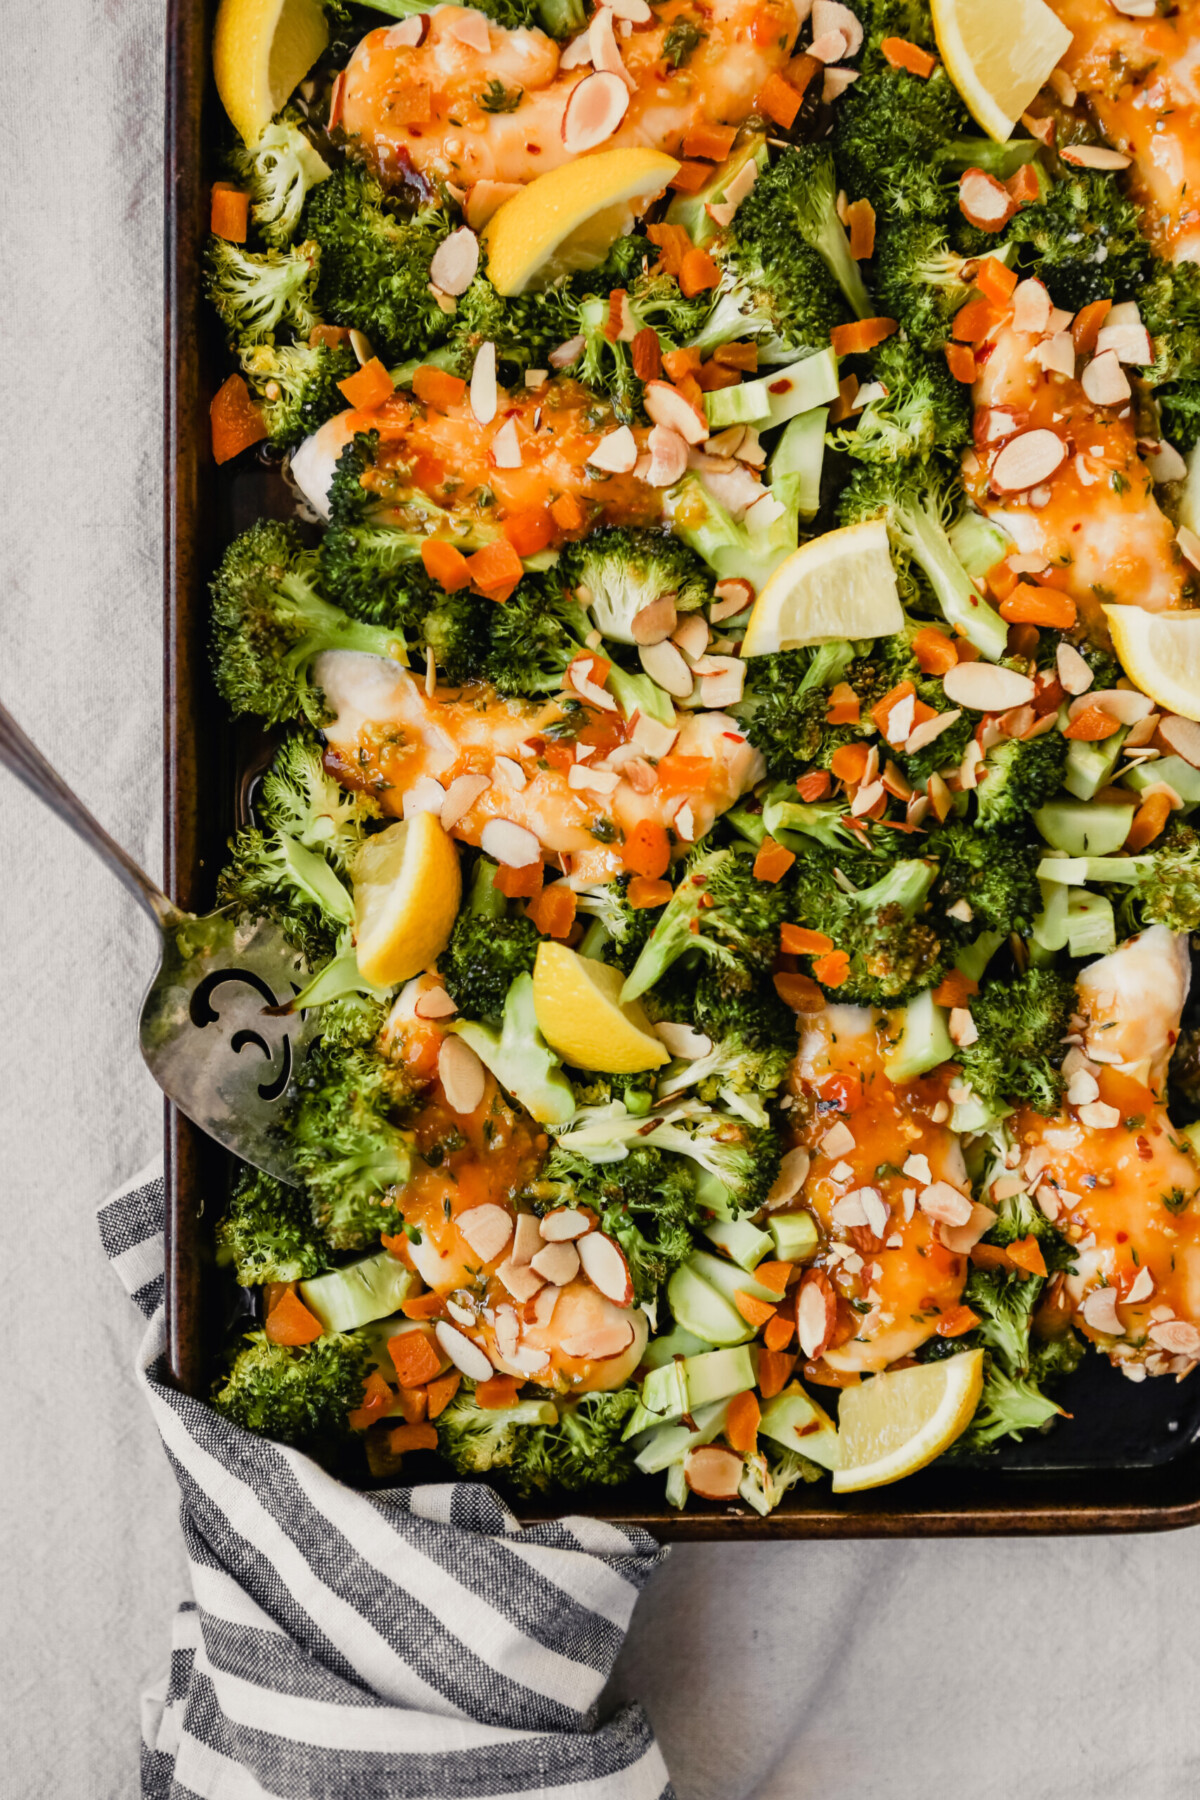 Photograph of apricot-glazed chicken on a sheet pan with broccoli, almond and lemon wedges.